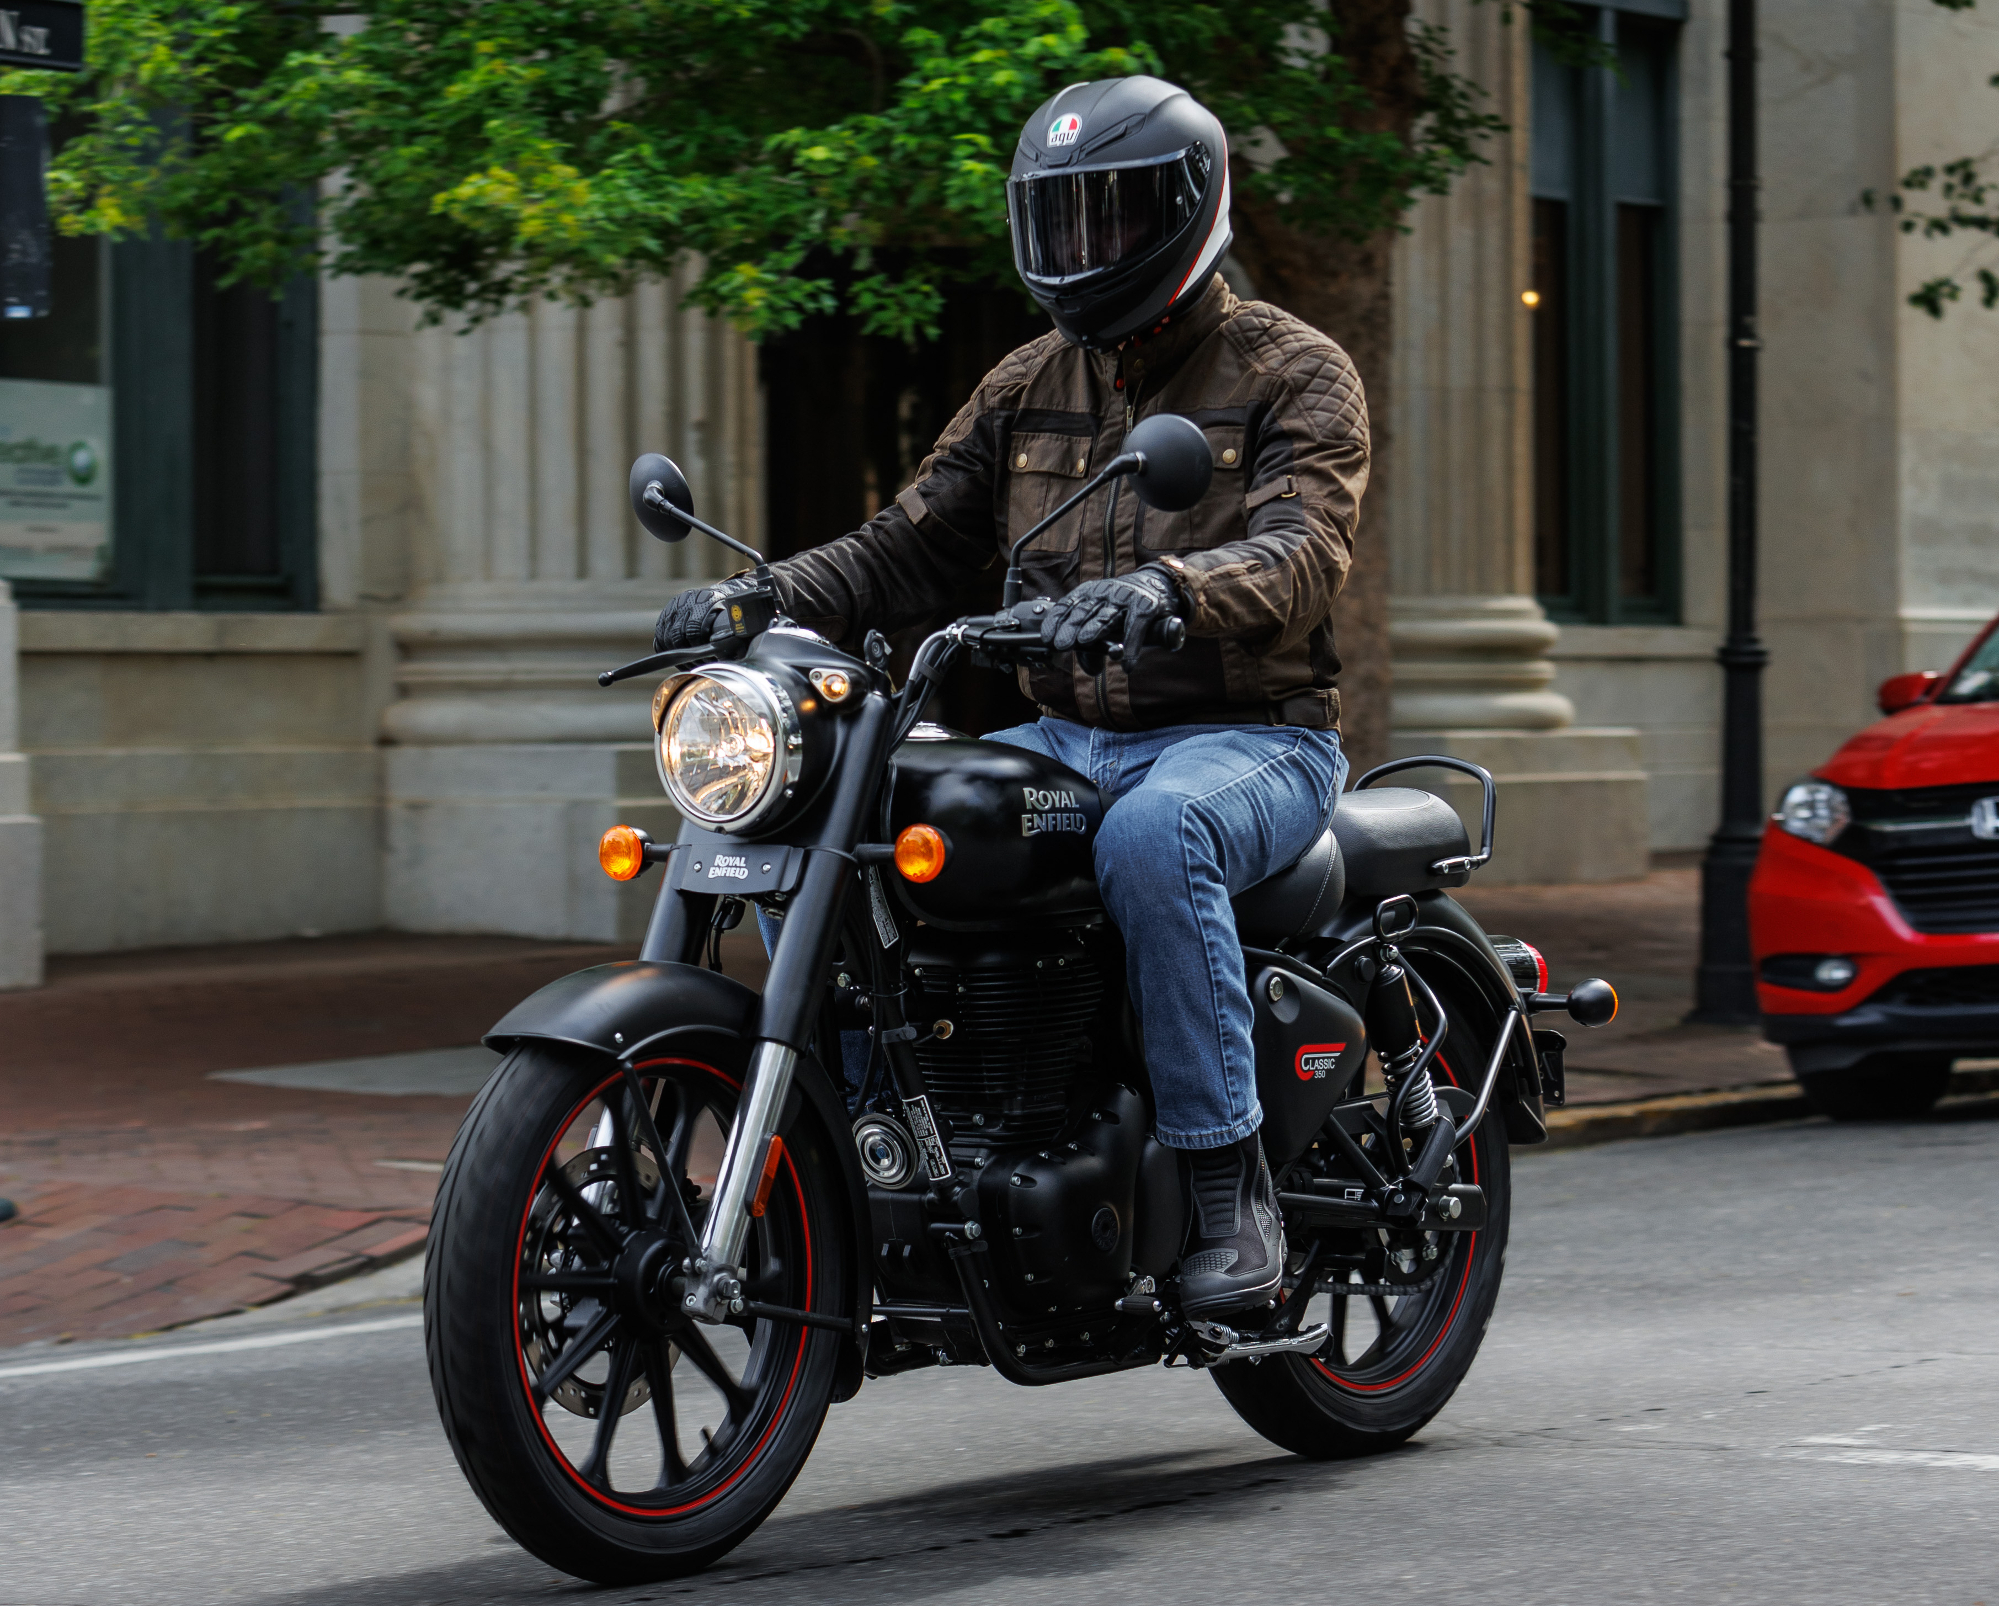 Riding the Royal Enfield Classic 350 in Savannah with the Merlin Shenstone